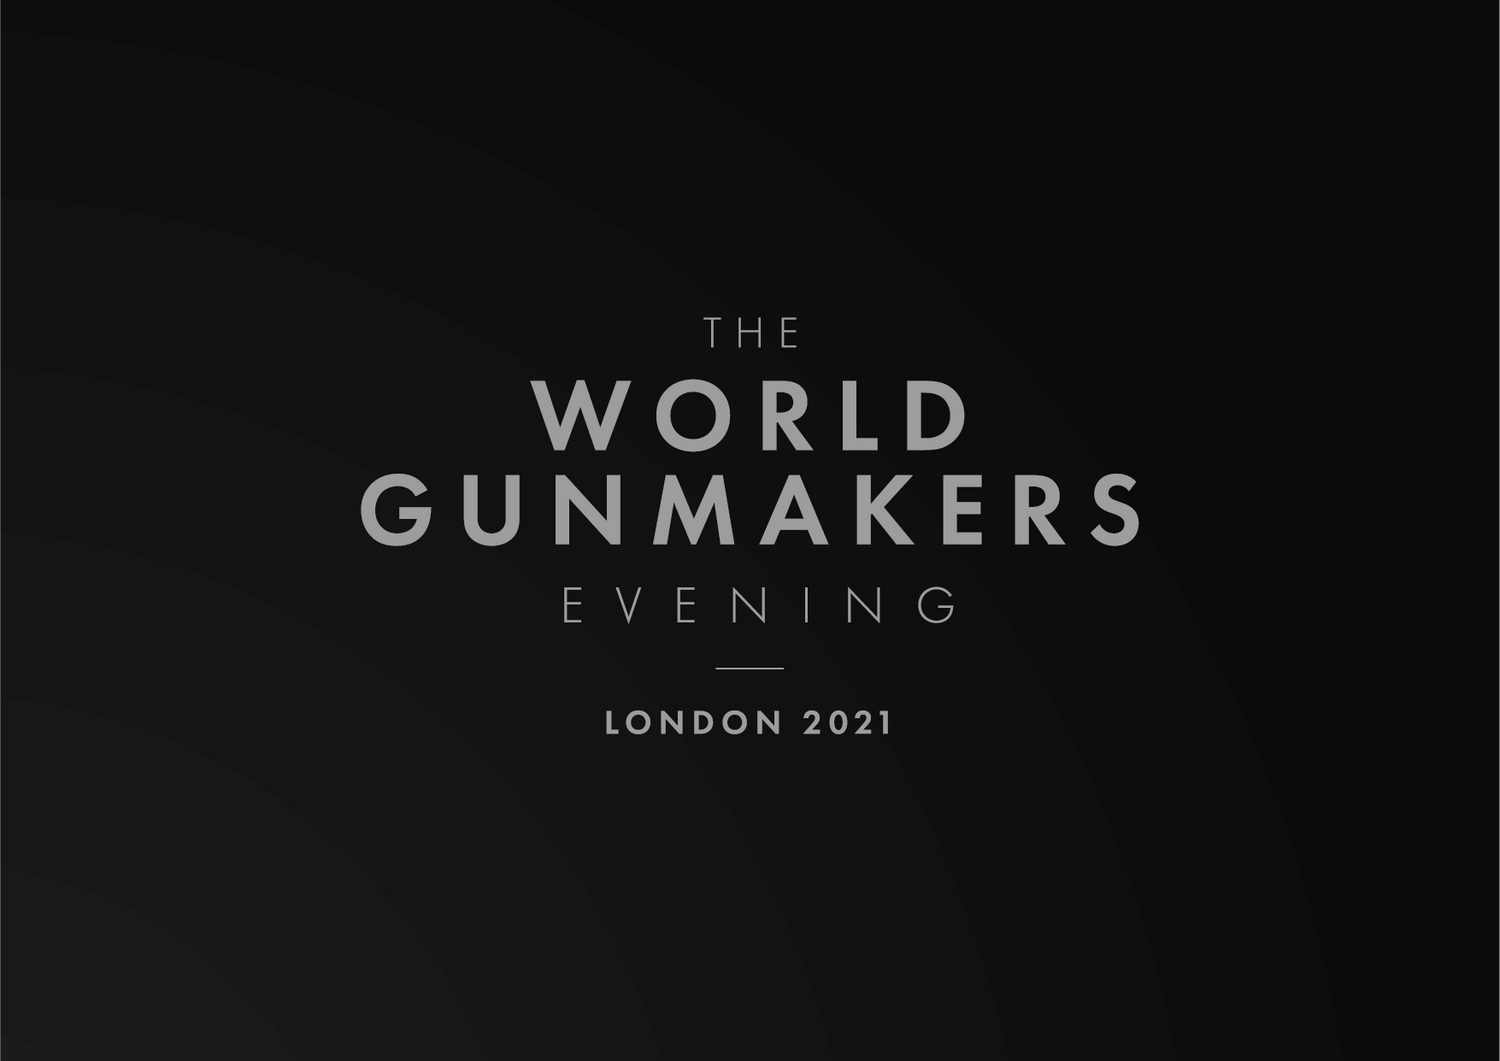 Purdey at The World Gunmakers Evening, 2021